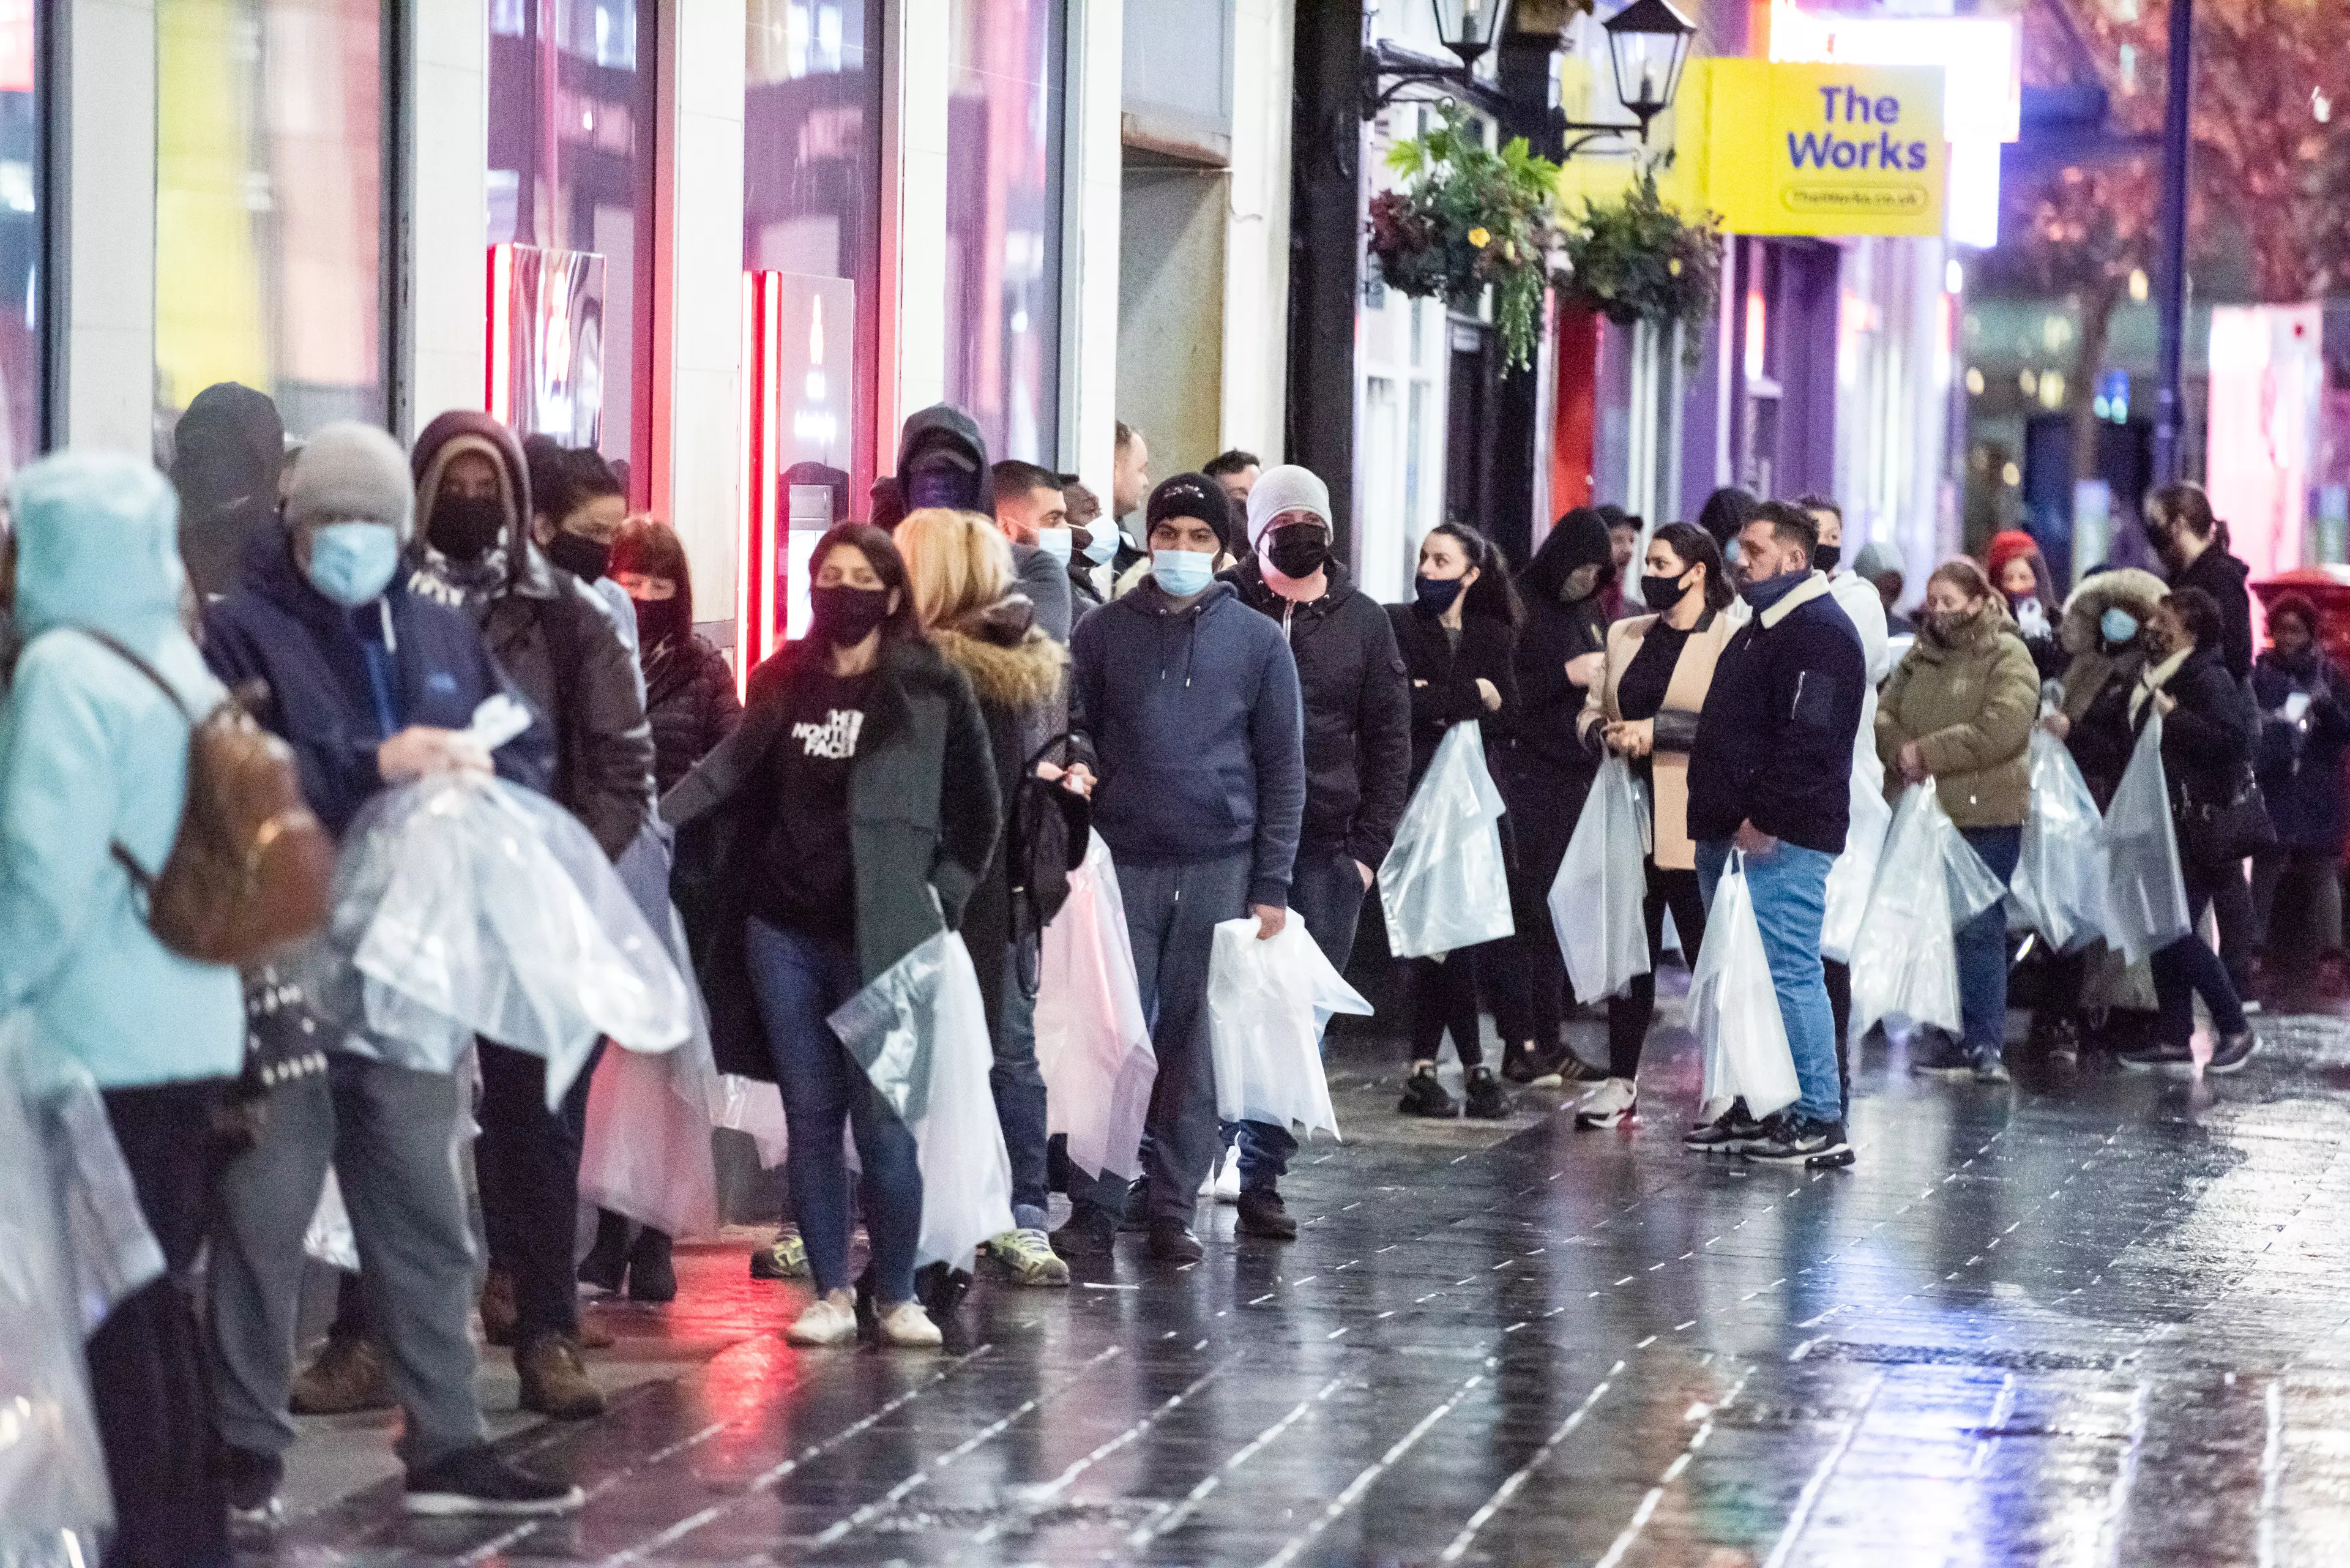 Shoppers in Liverpool were after a bargain.